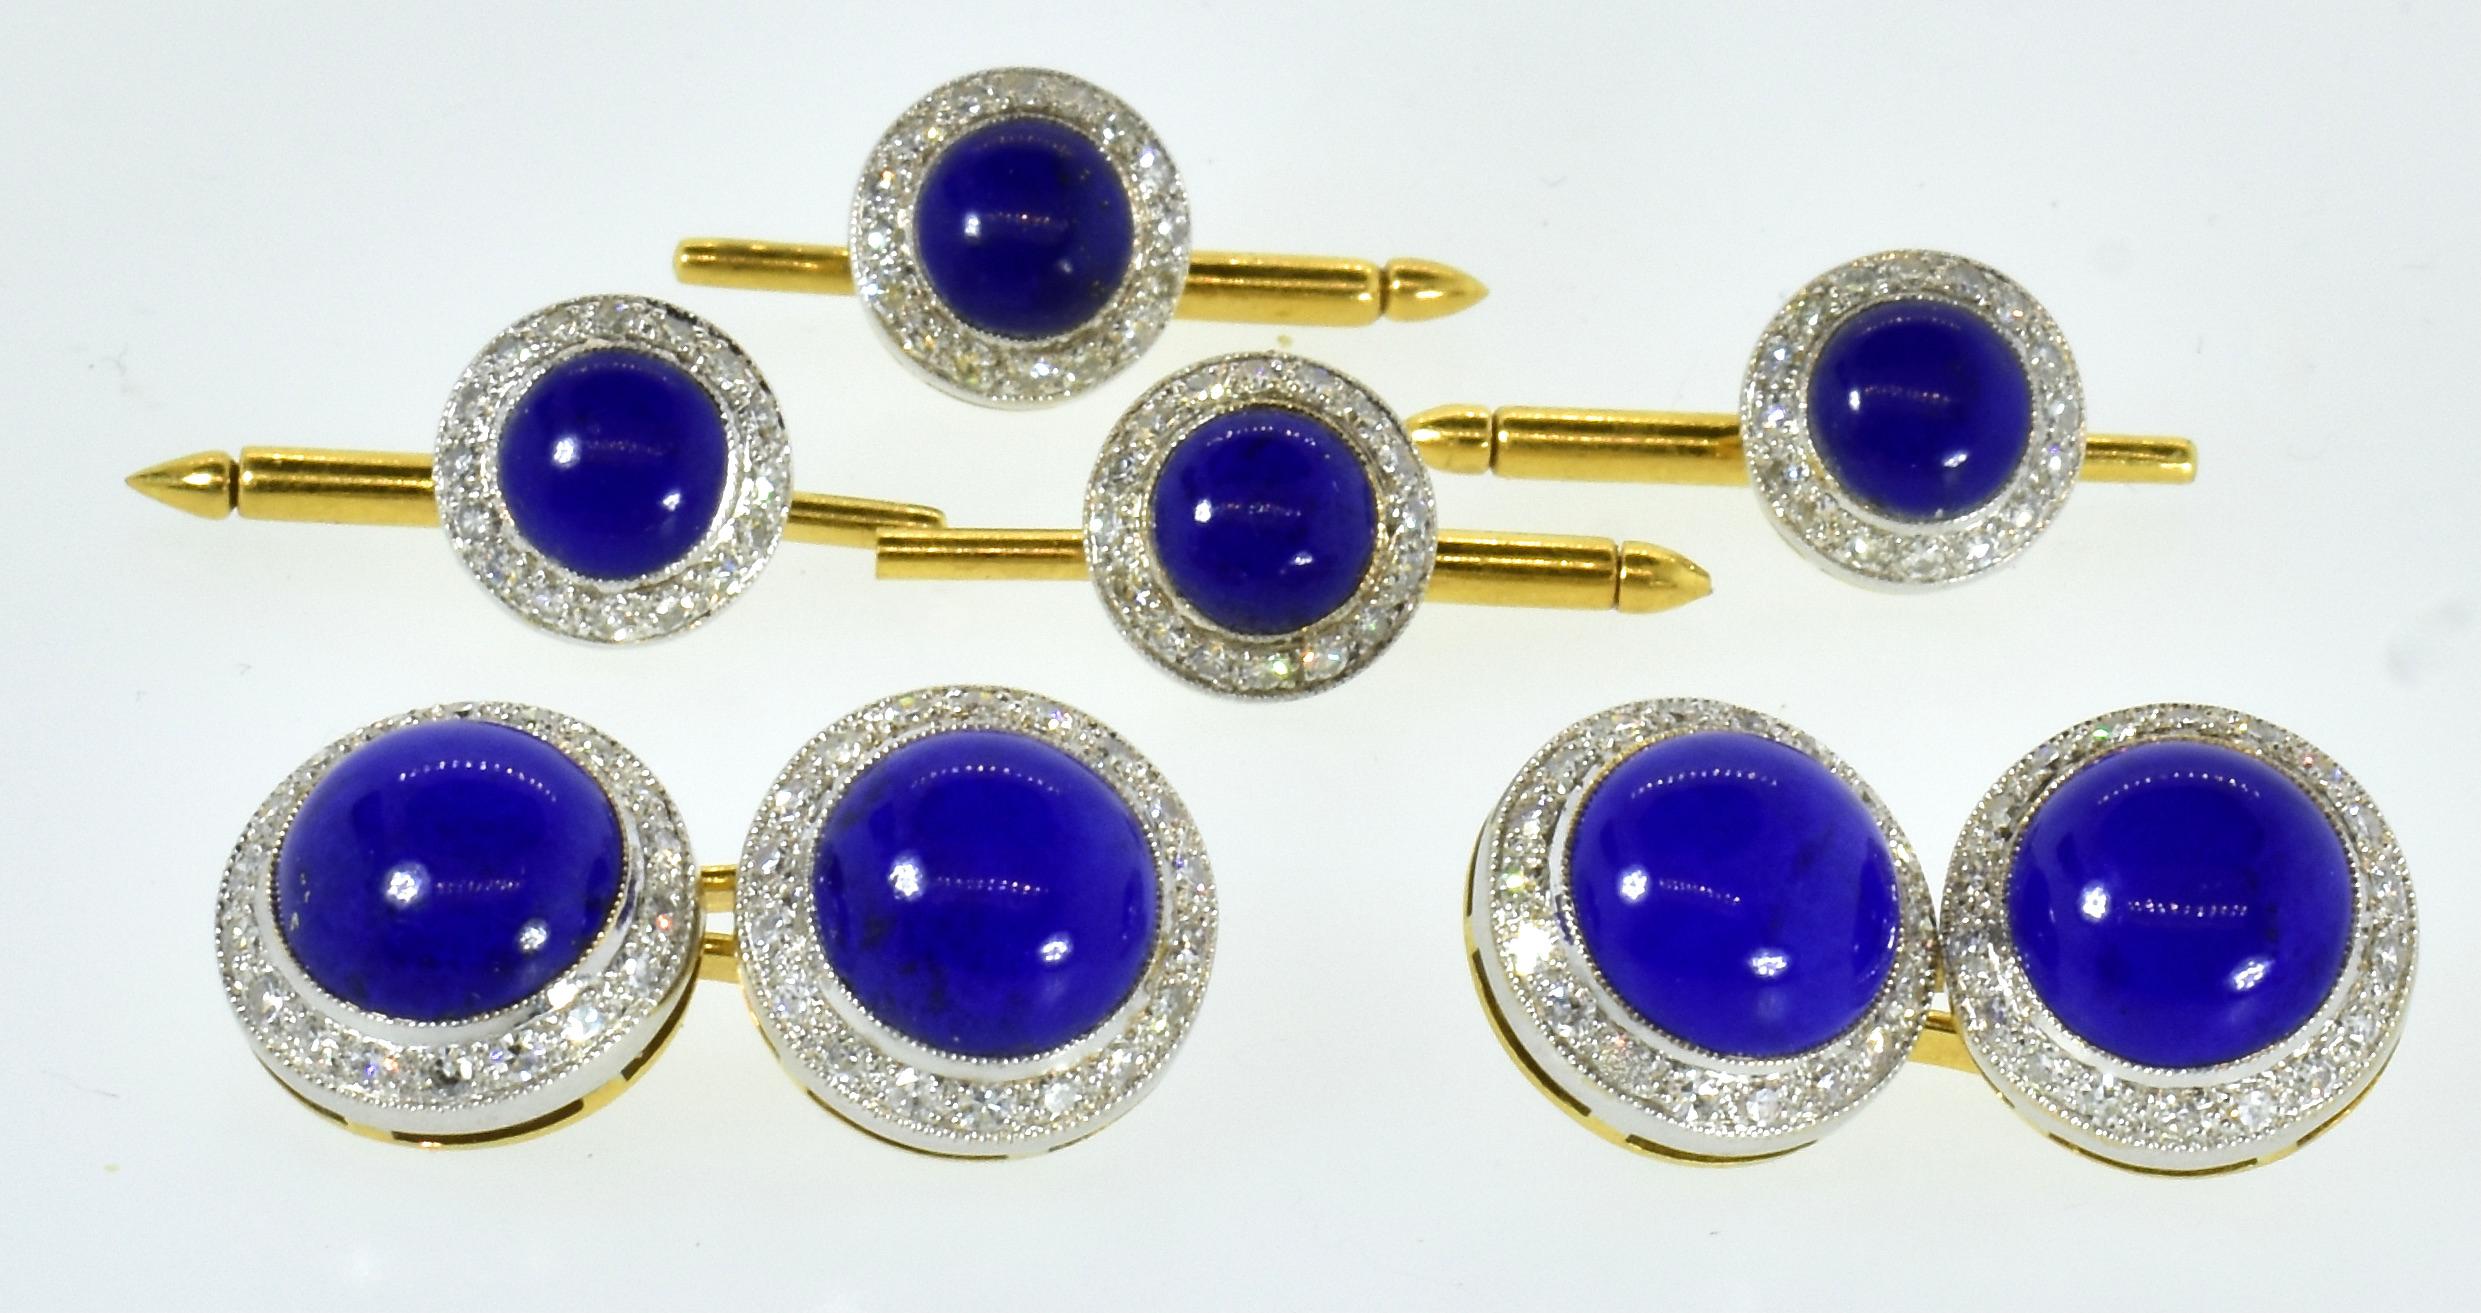 Lapis Lazuli and diamond 18K French yellow and white cufflinks and stud set.  The 8 fine blue lapis match well in both their cabochon cut and vivid blue color.  The diamonds surrounding each lapis are bead set in 18K white gold.  The estimated